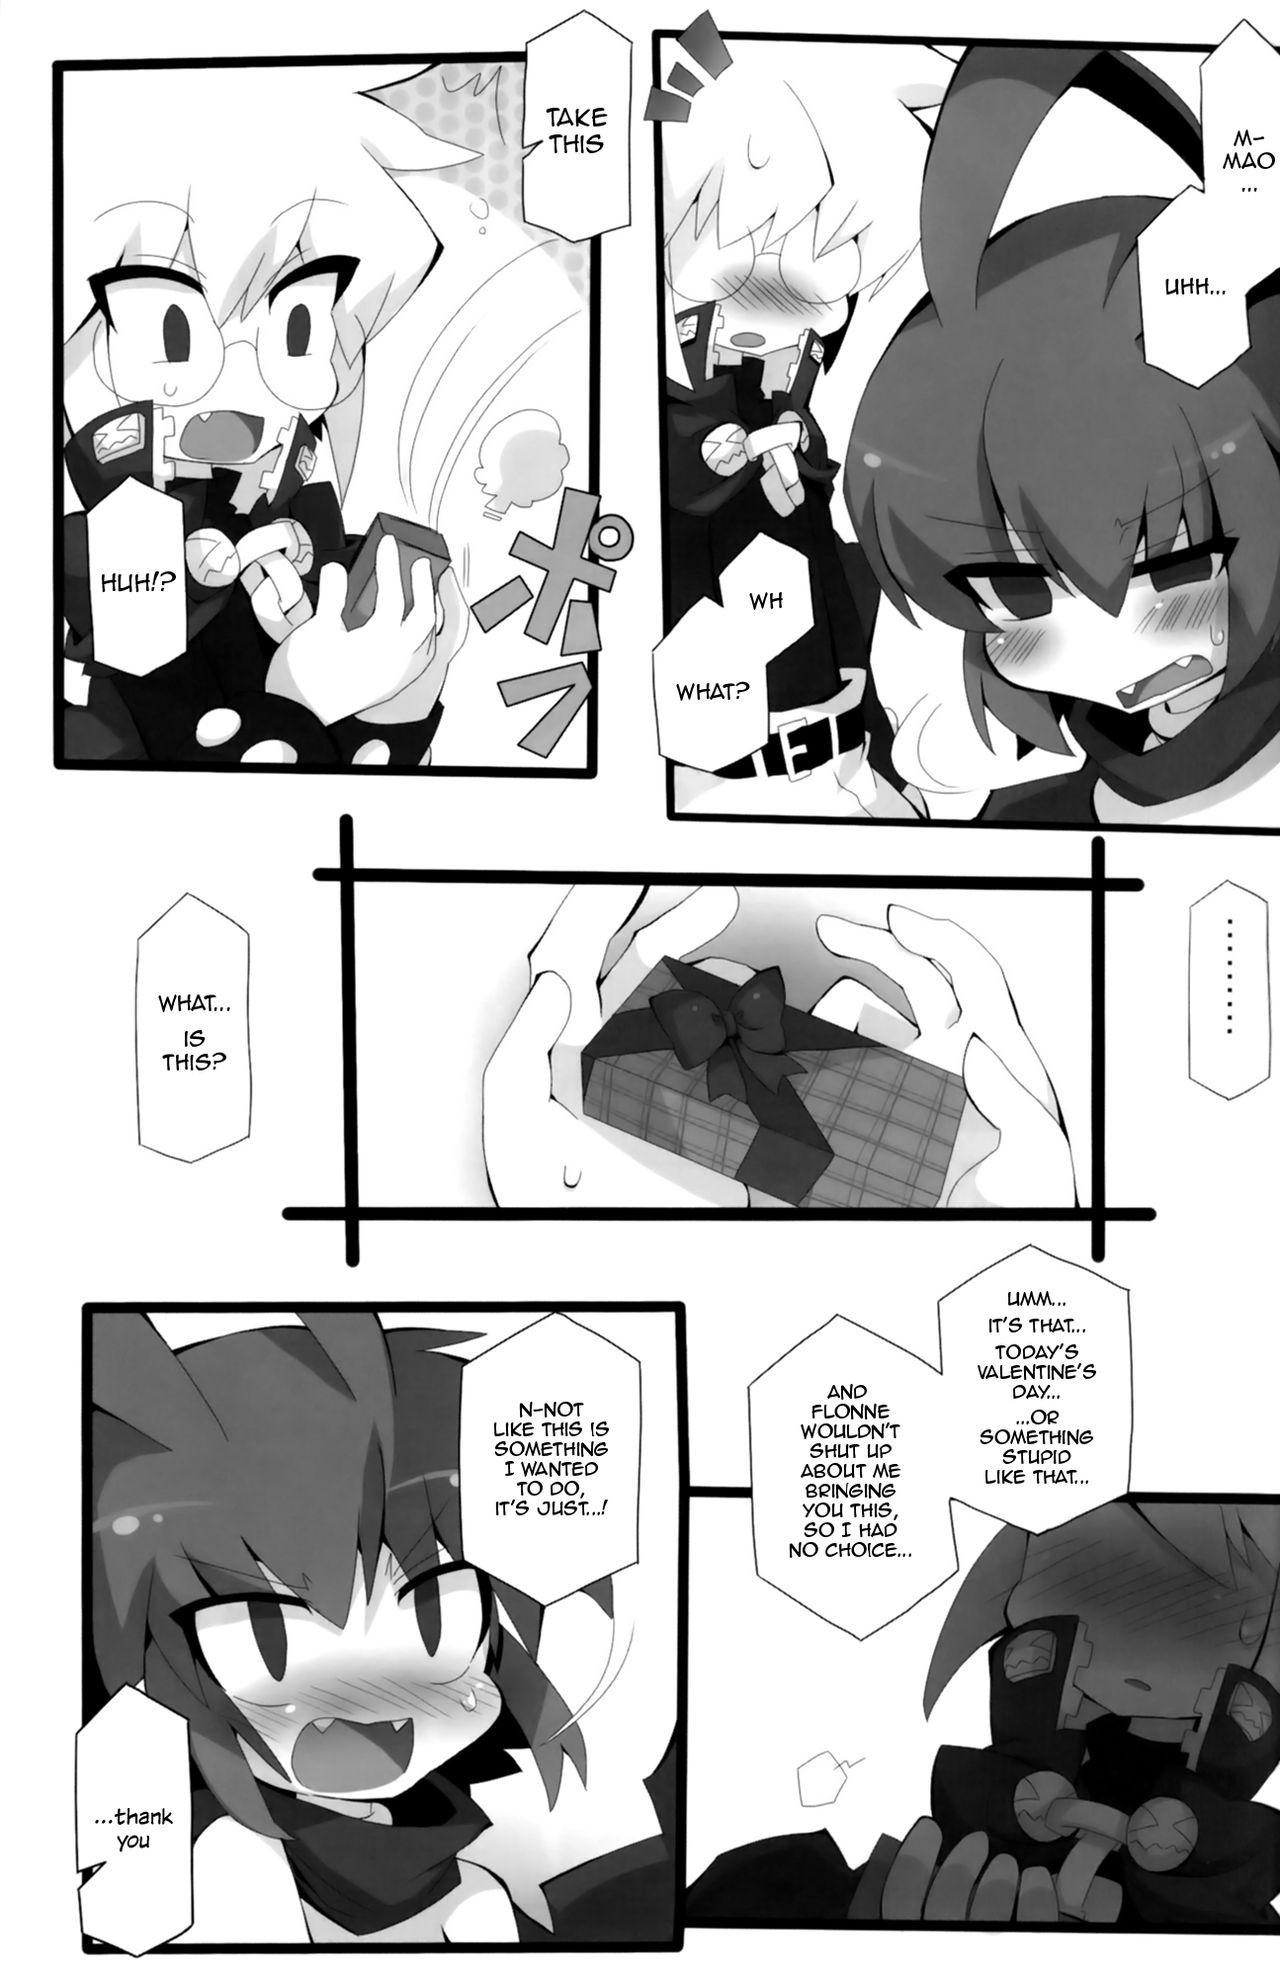 Teen Sweet Darkness - Disgaea Rough Sex Porn - Page 4